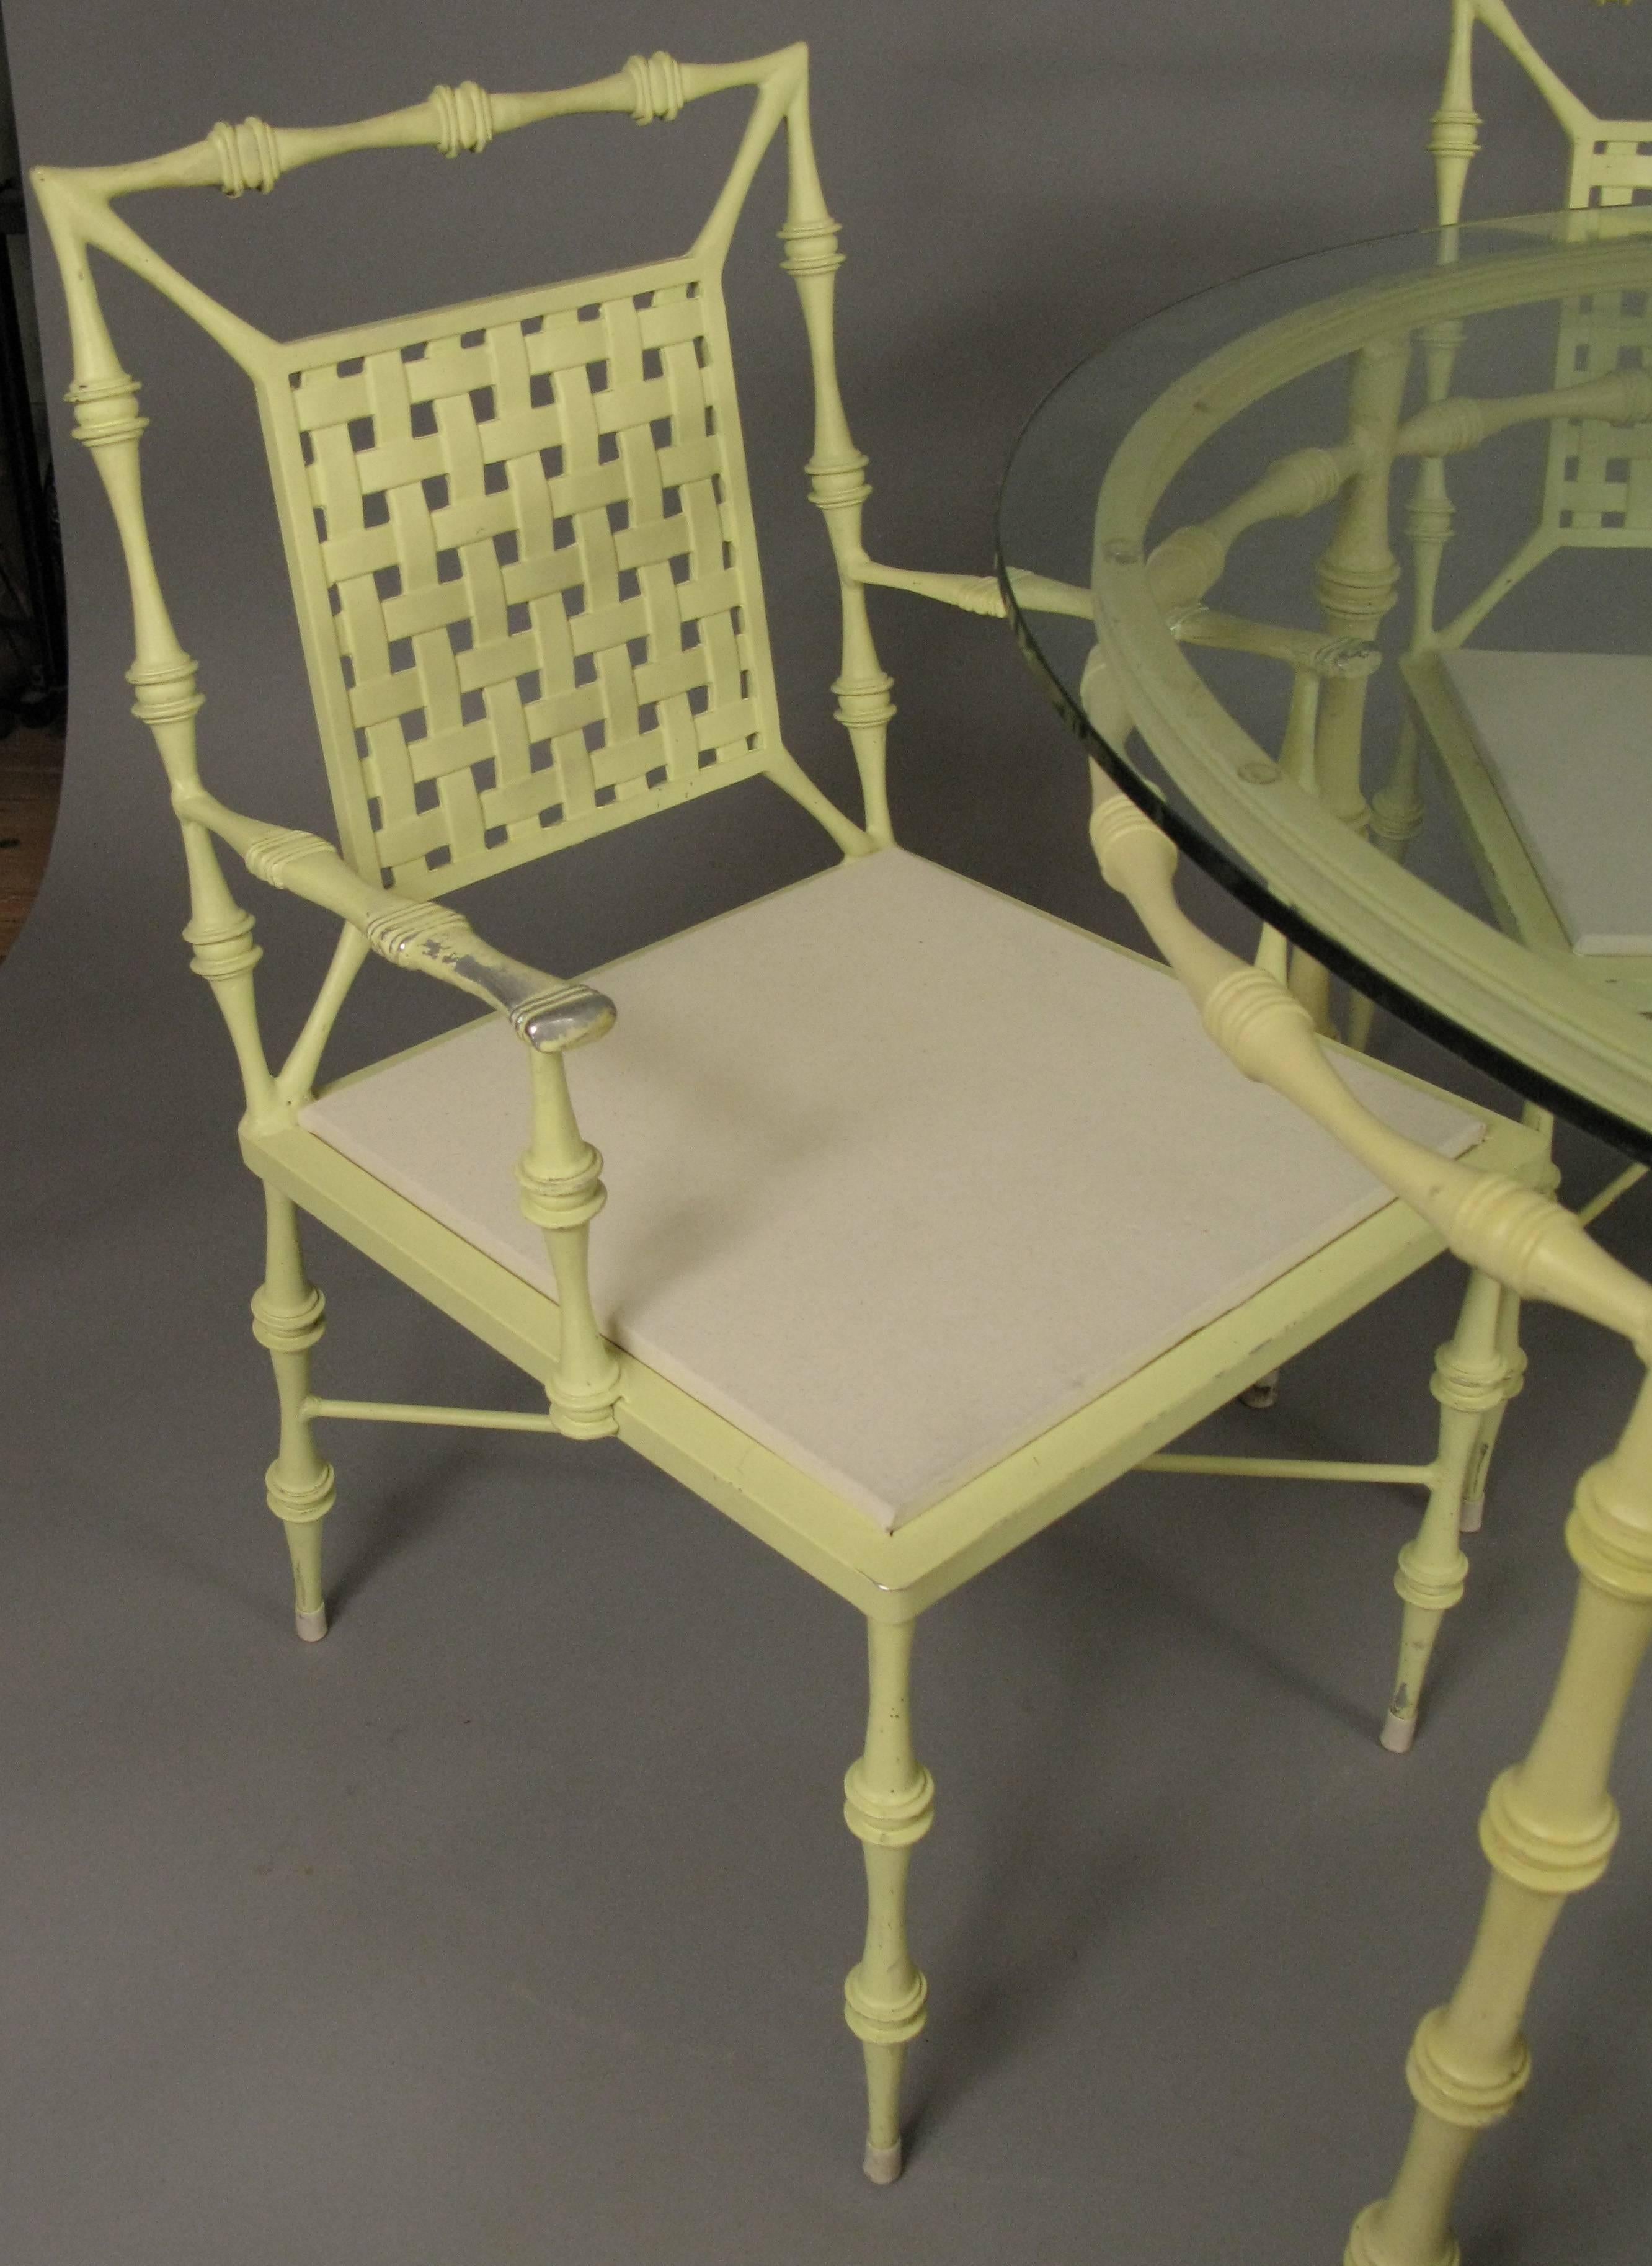 A very charming and elegant vintage 1960s aluminium dining set by Phyllis Morris, with a glass top round table and four chairs, including an armchair. All in their original yellow finish, in good condition with light wear overall.

Measures: Chair